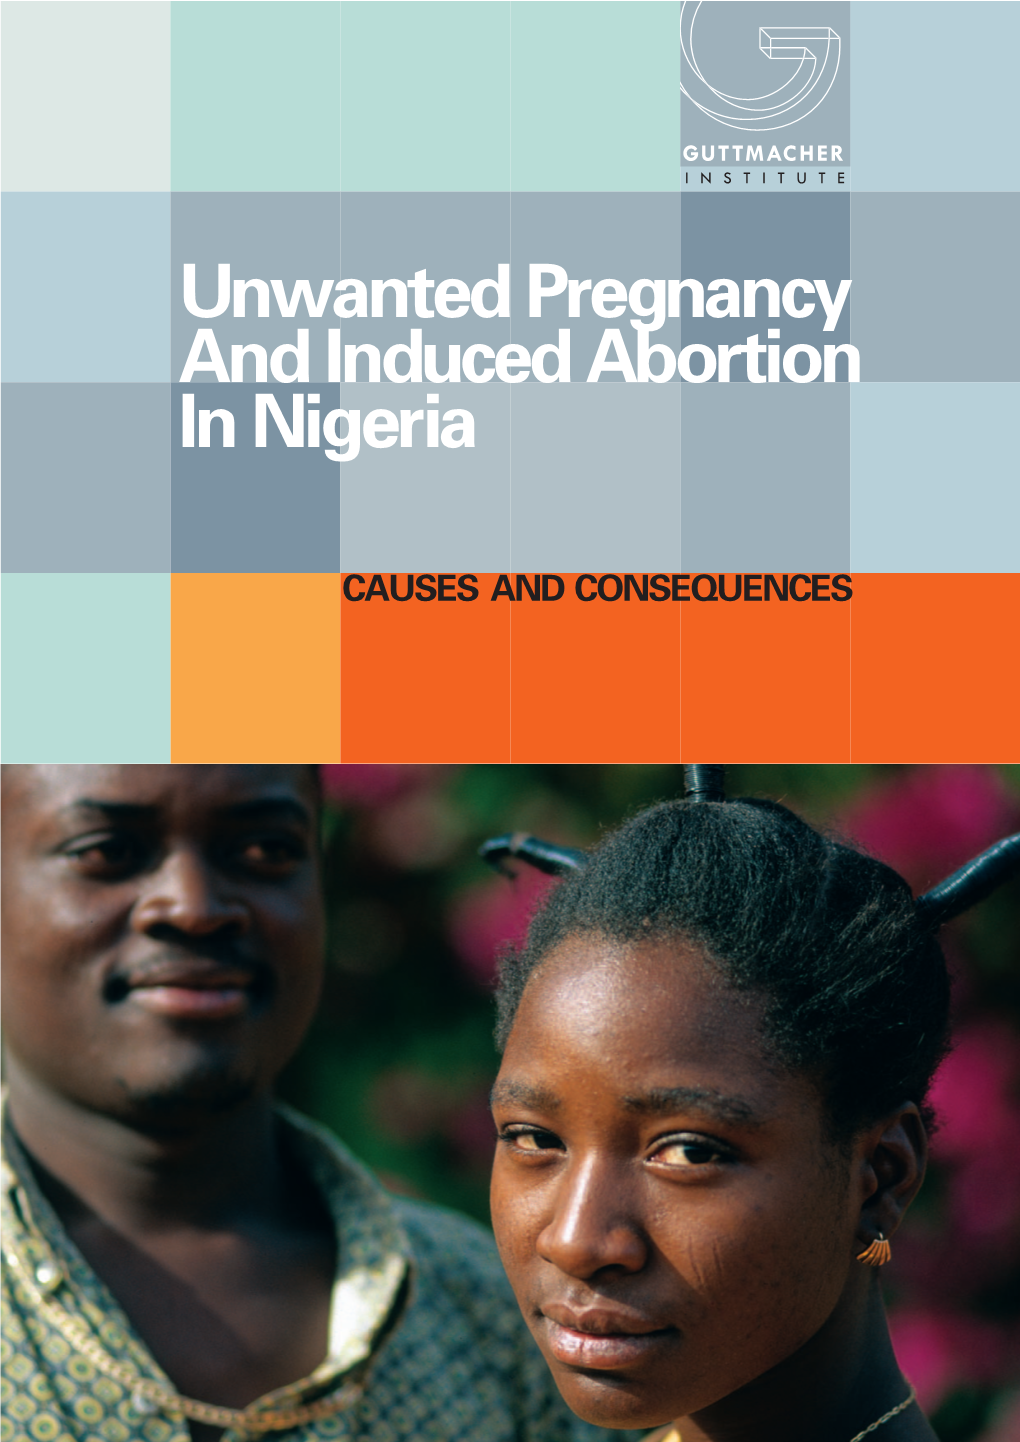 Unwanted Pregnancy and Induced Abortion in Nigeria Causes